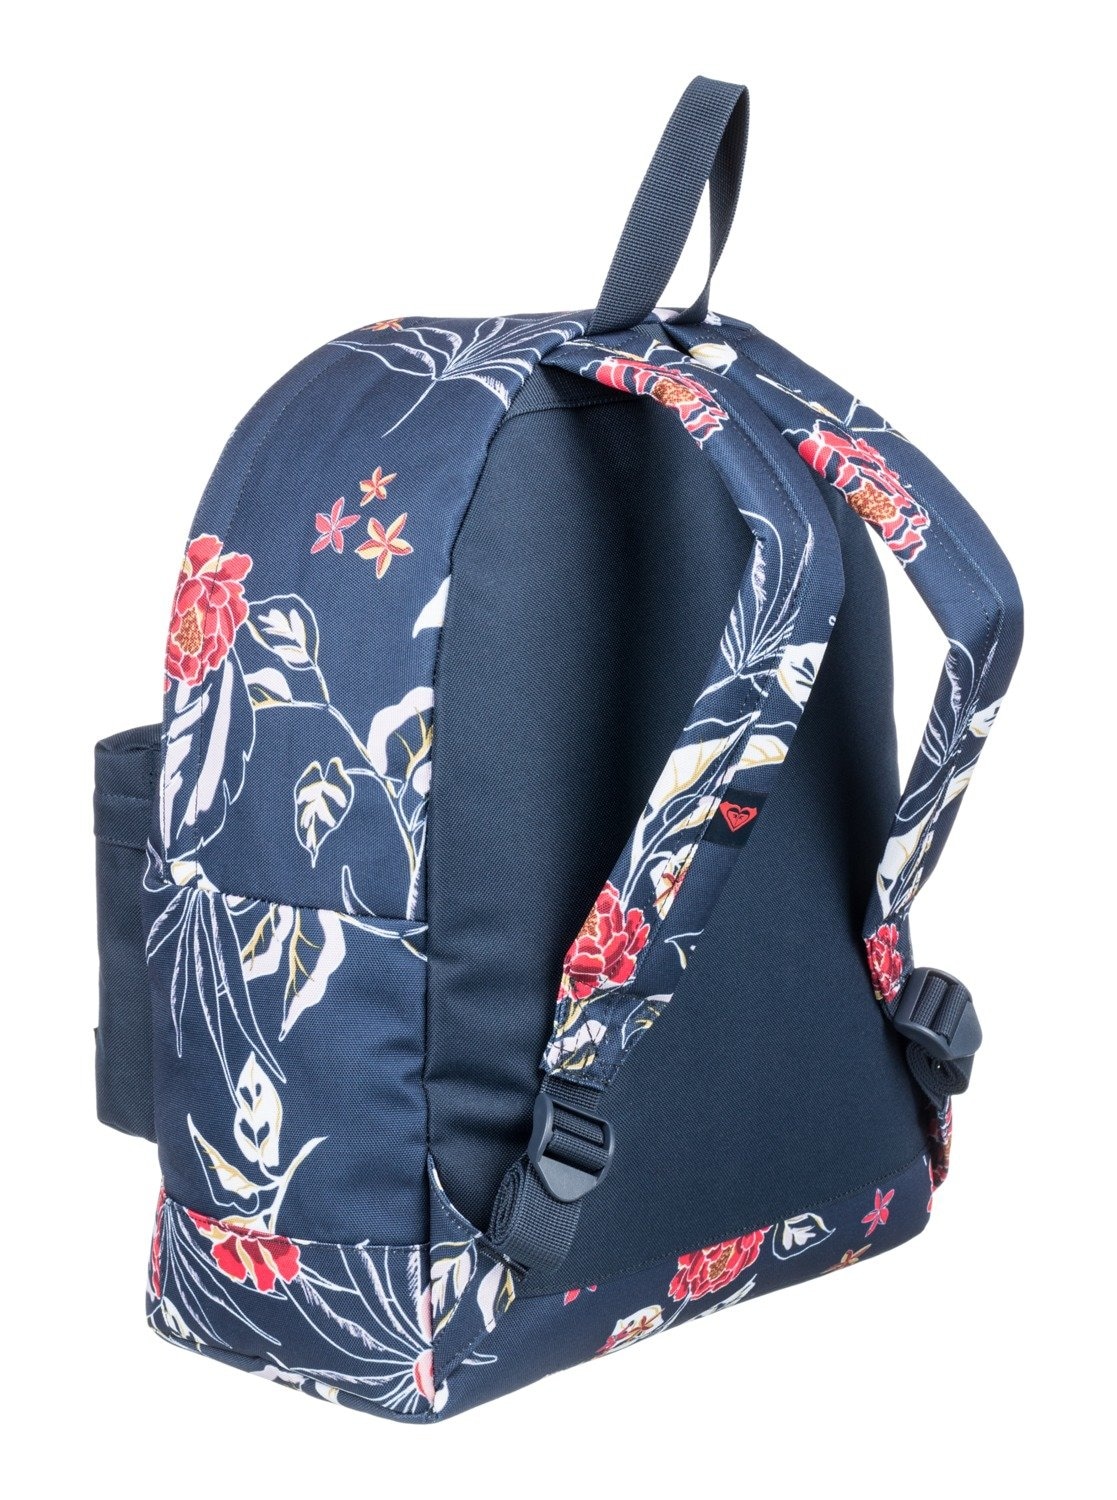 Roxy Tagesrucksack »Be Young 24 L«